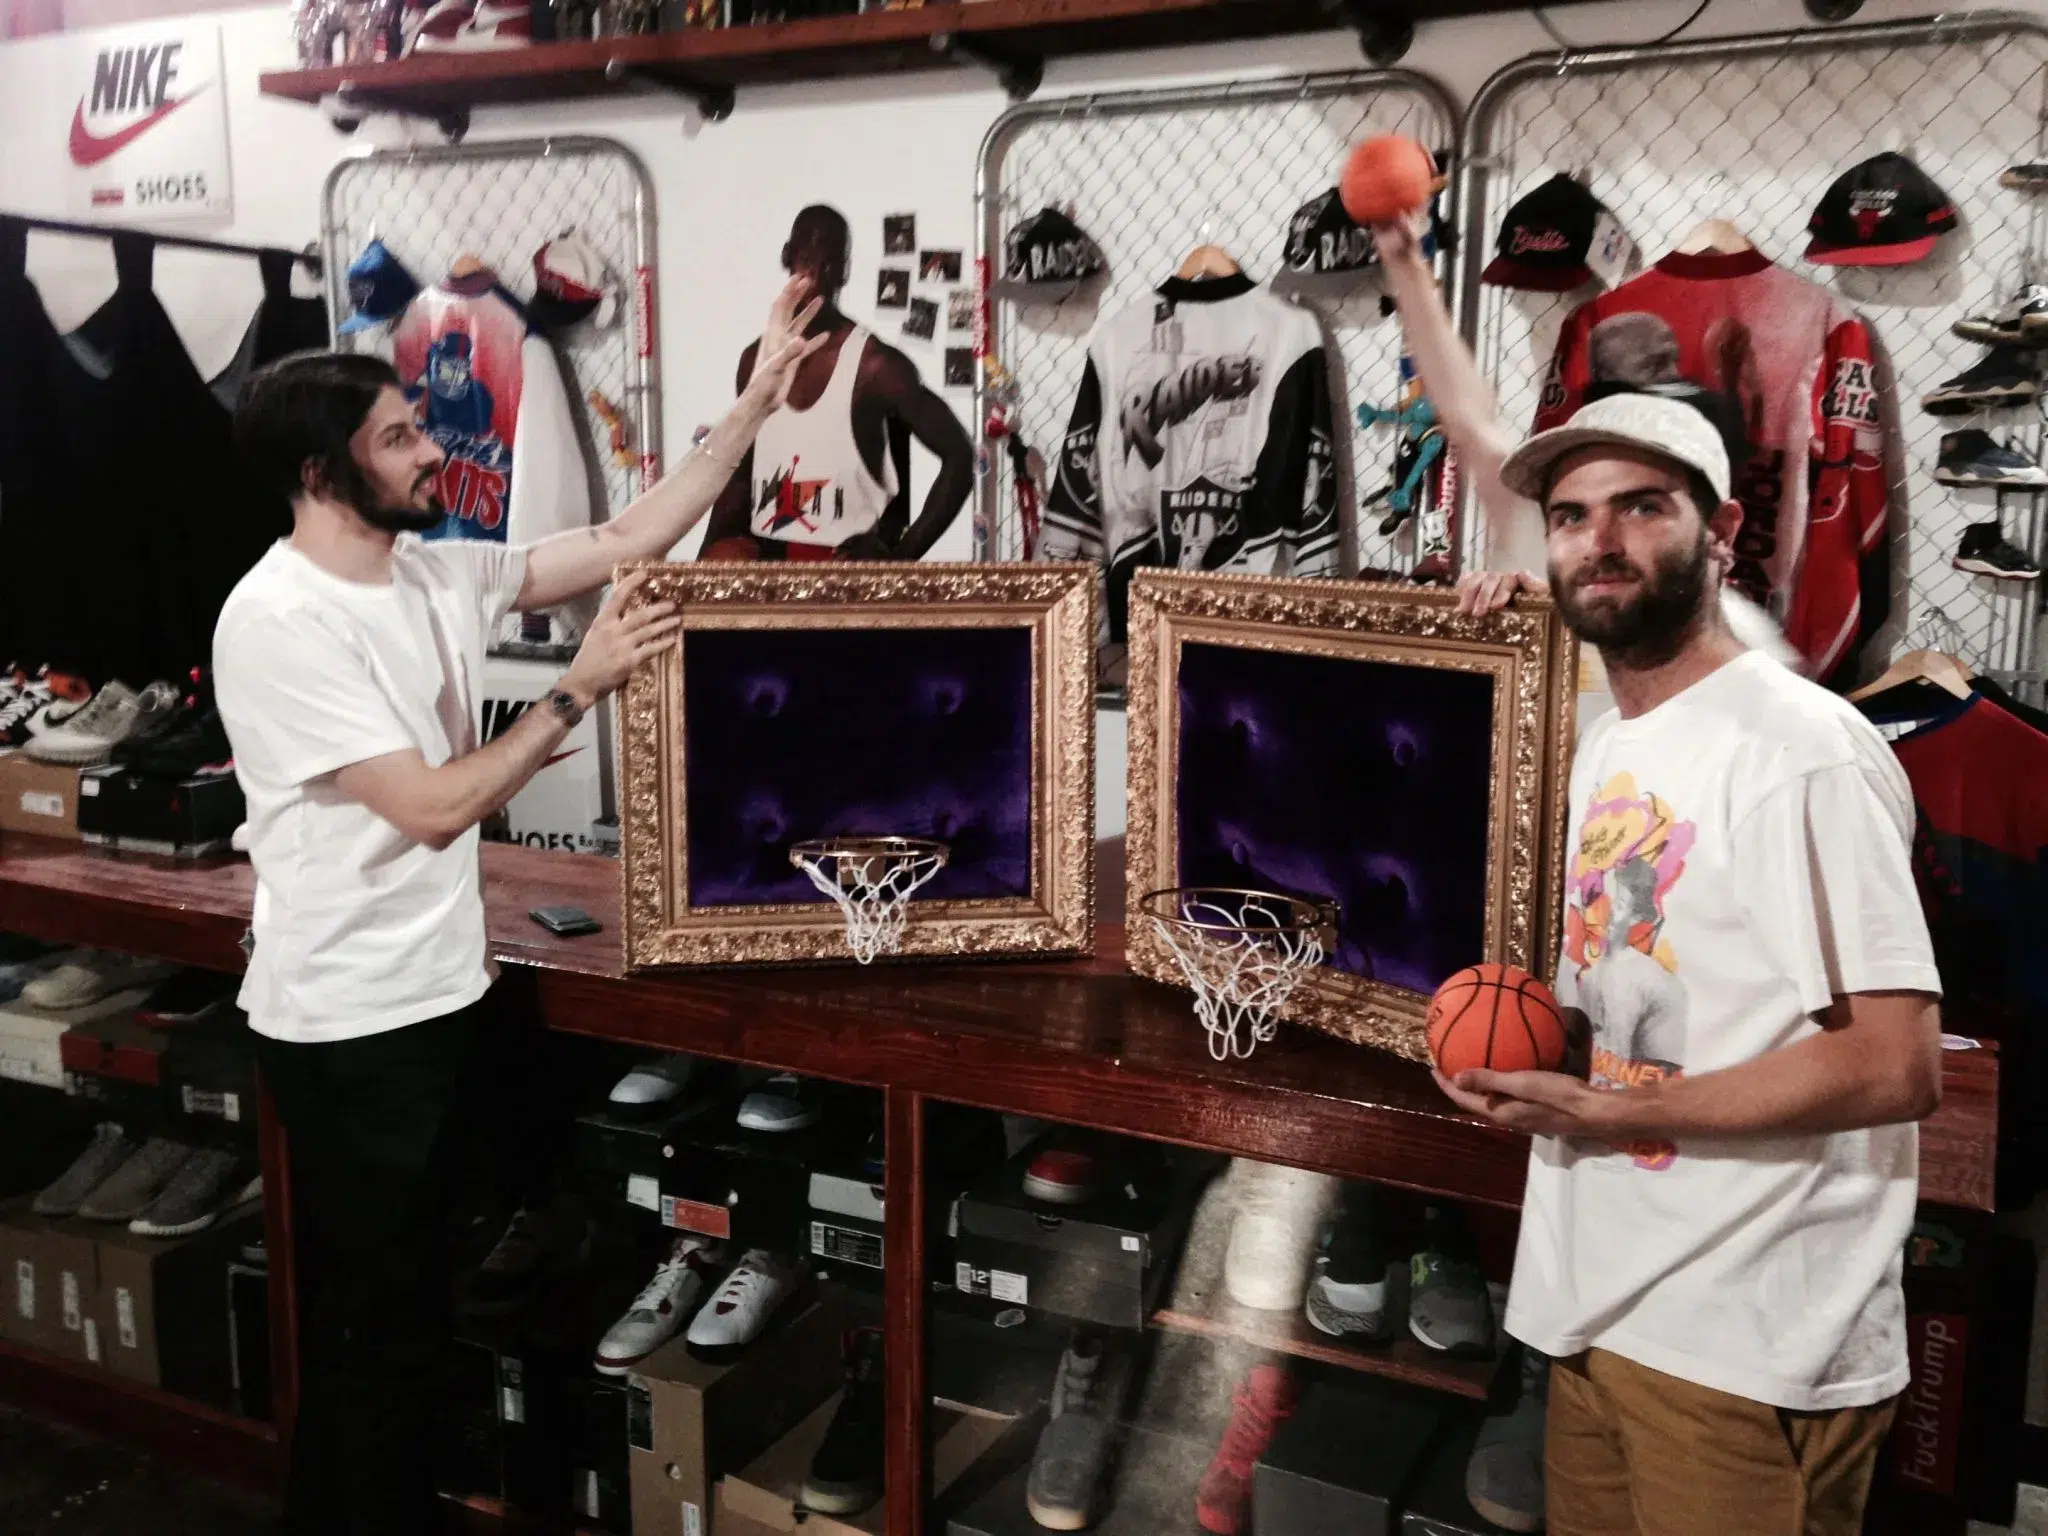 Two men standing next to a basketball hoop in a store.